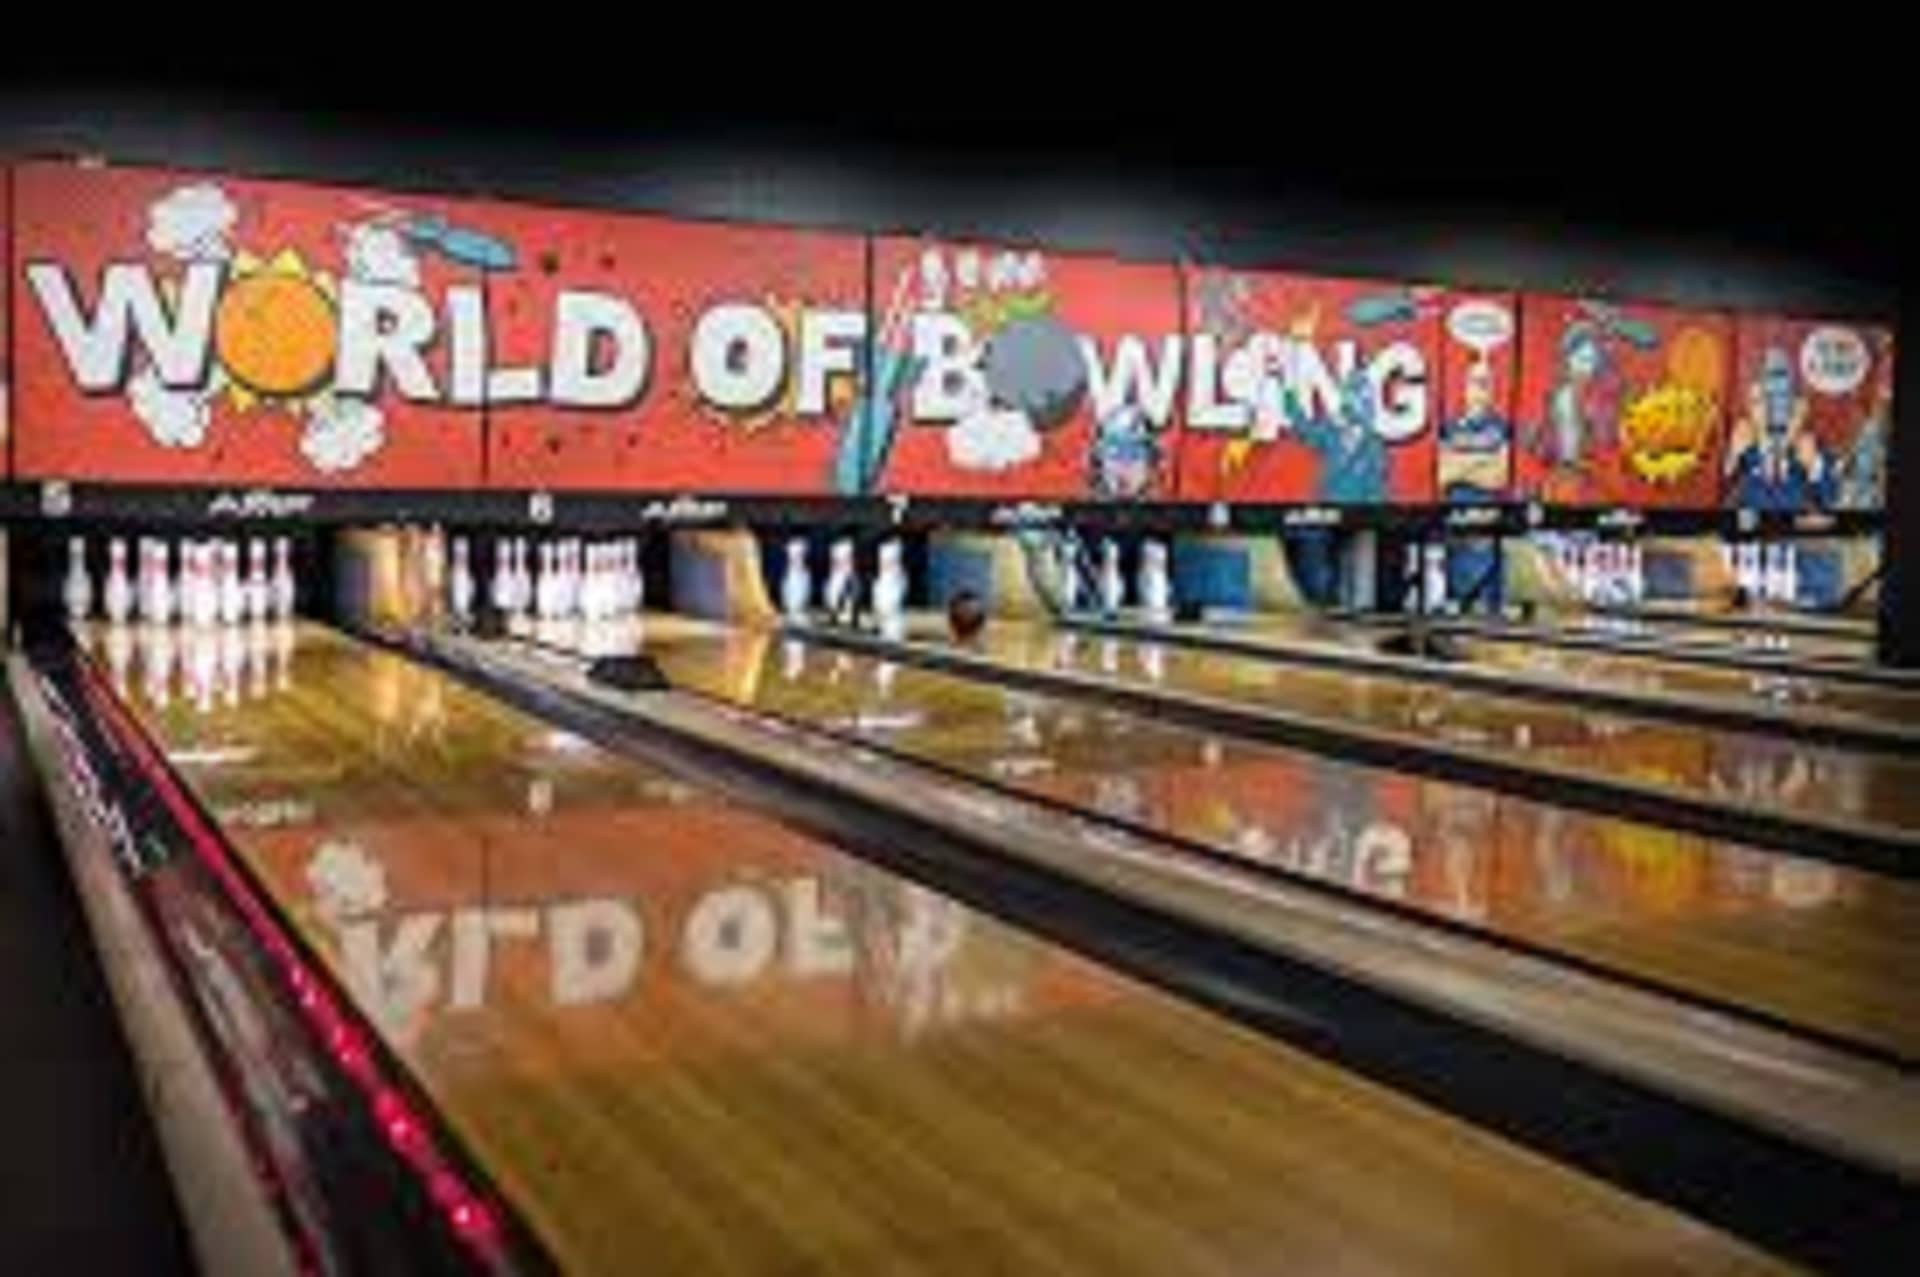 World Of Bowling in UK